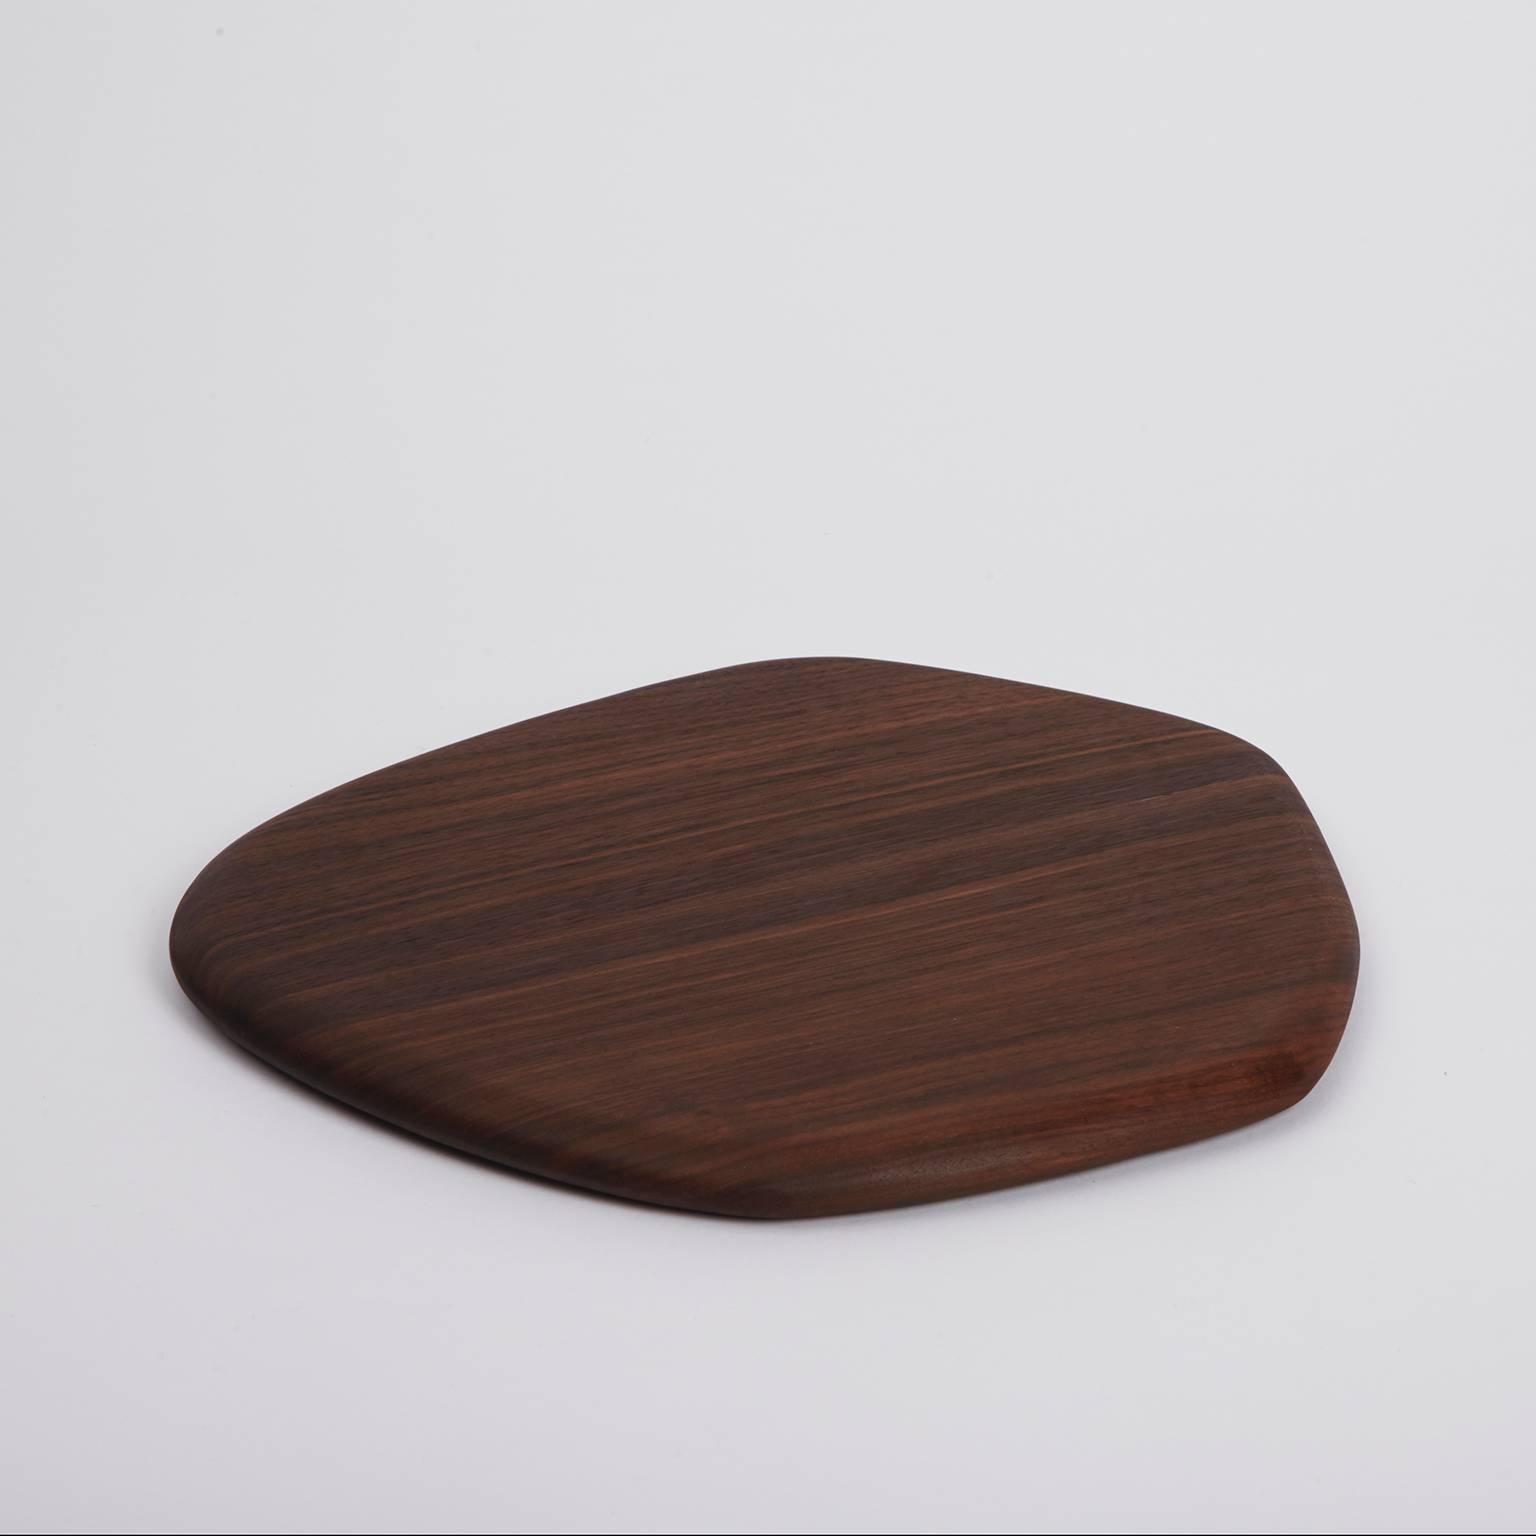 Handcrafted in Brooklyn, Noah Spencer carefully selects wood with beautiful grain patterns to create each Pebble Cutting Board. These sculptural and functional objects are great for simple kitchen cutting and artful food presentation. 

Materials: